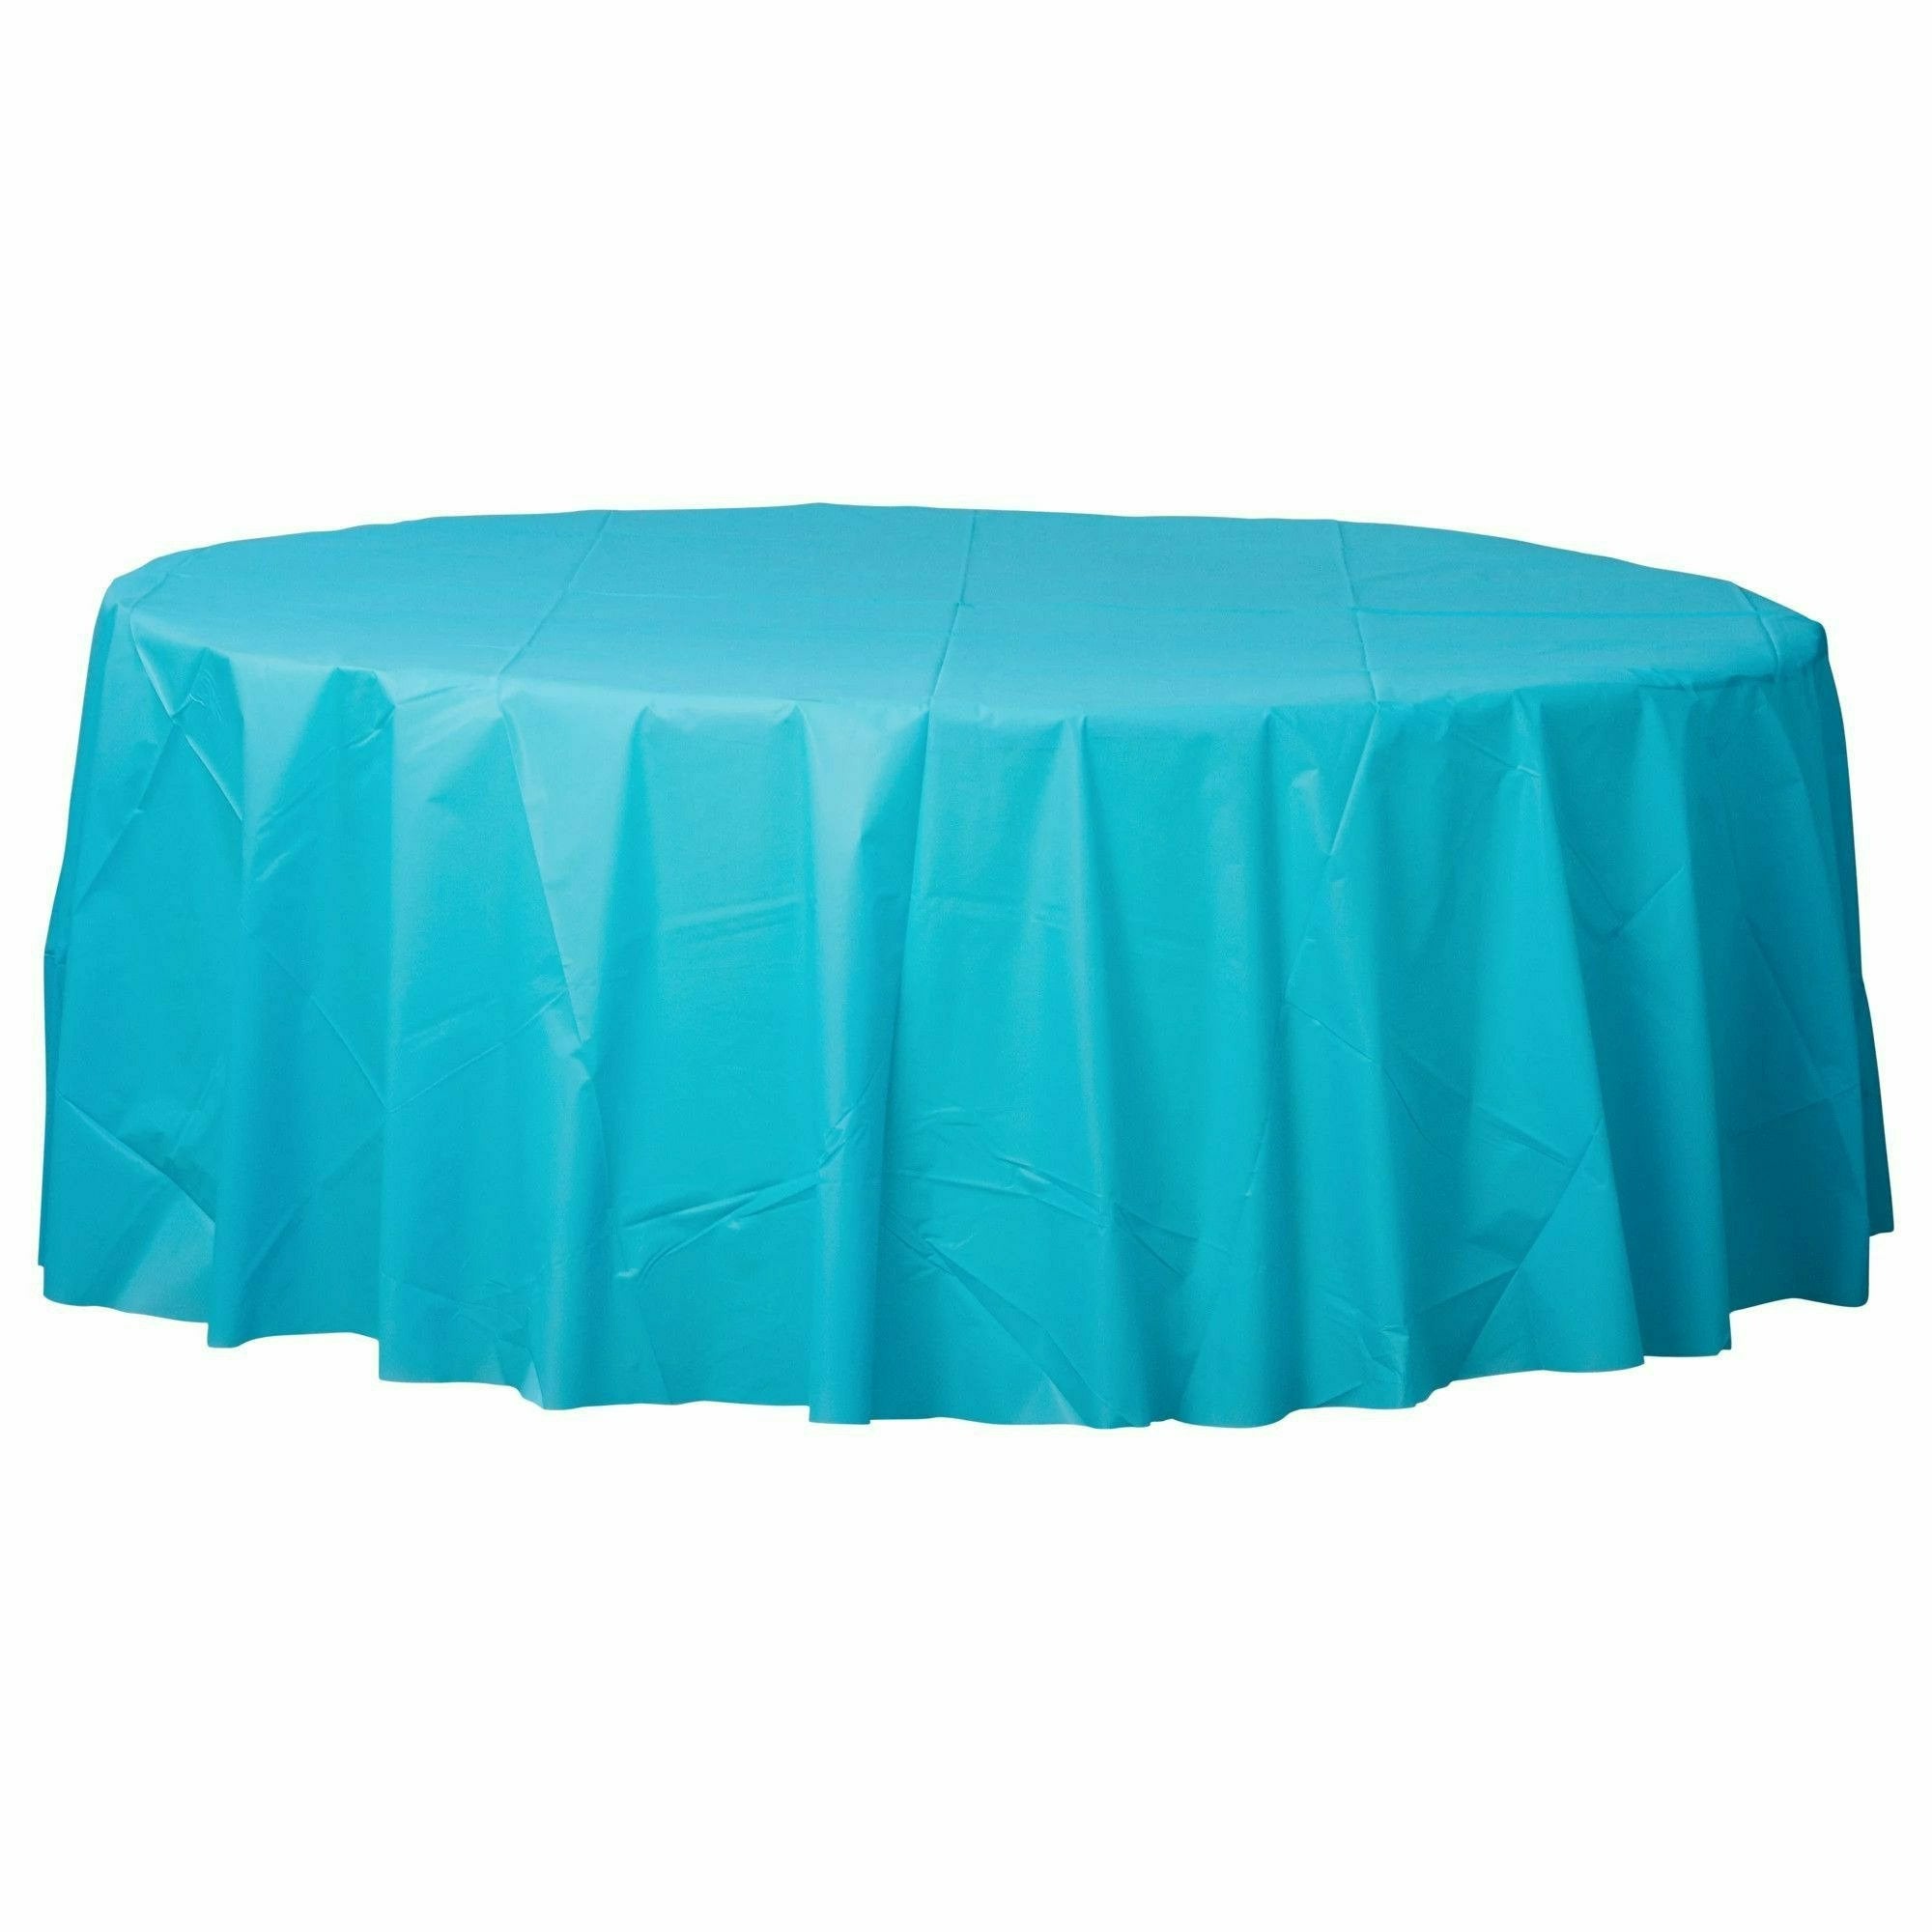 Amscan BASIC Caribbean - 84" Round Plastic Table Cover